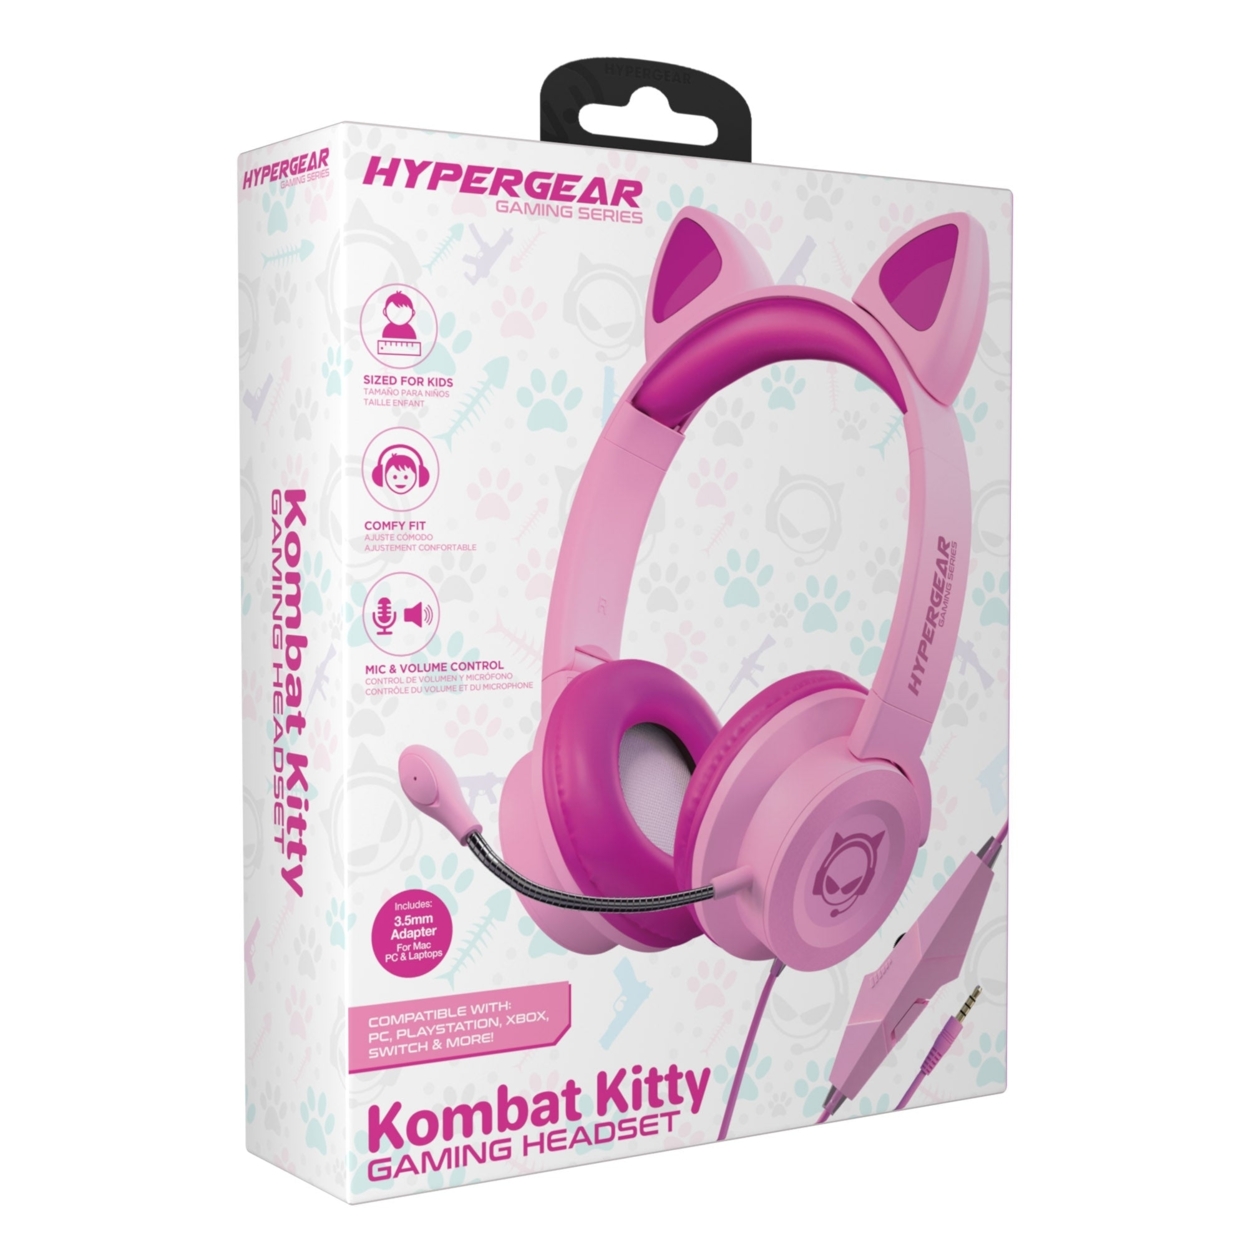 HyperGear Kombat Kitty Gaming Headset With Detachable Mic - Pink